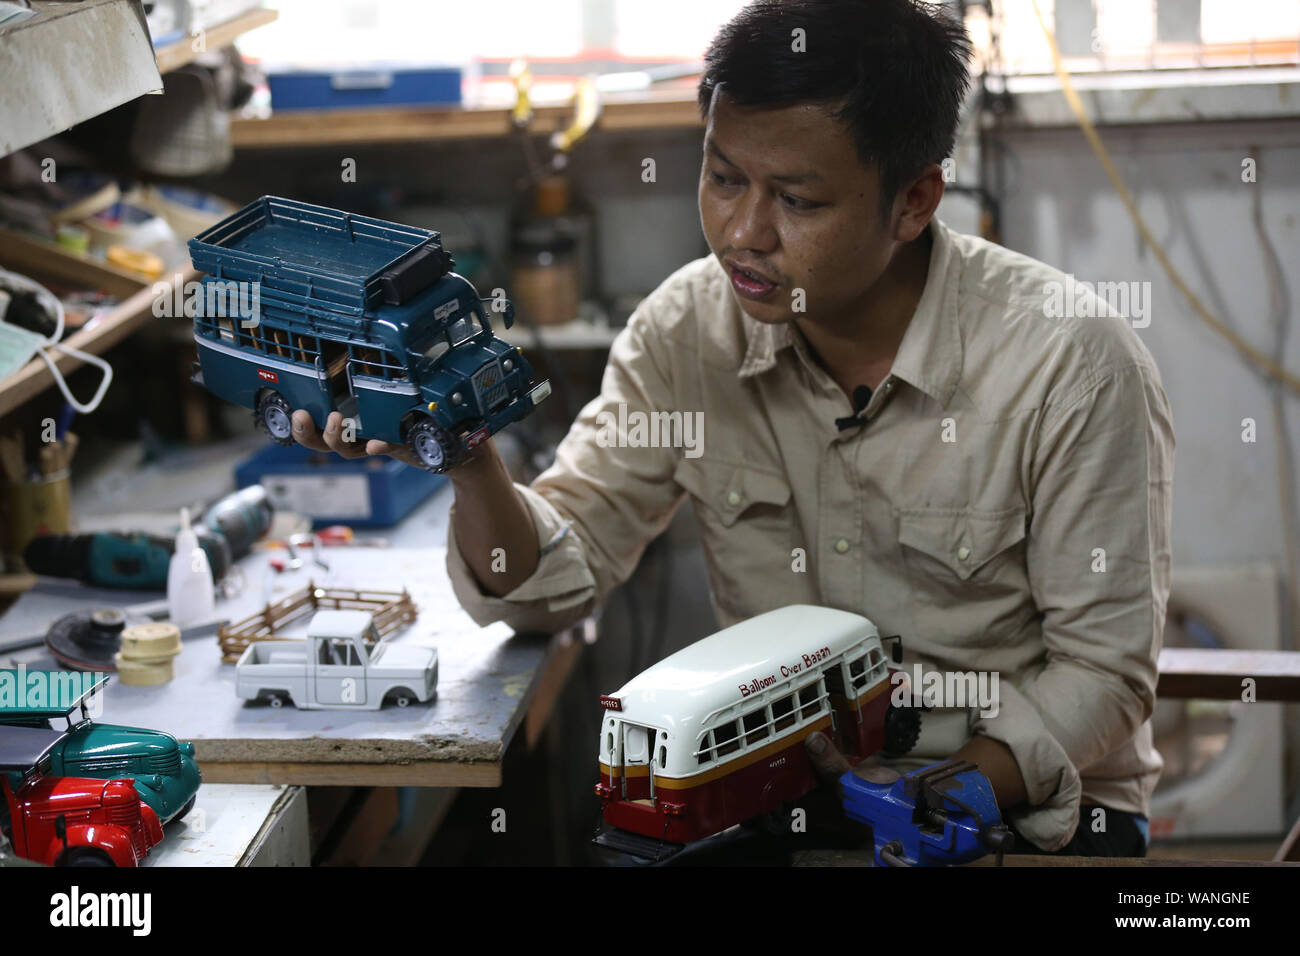 (190821) -- YANGON, Aug. 21, 2019 (Xinhua) -- Craftsman Zay Yar presents handicrafts at his workroom in Yangon, Myanmar, Aug. 20, 2019. Zay Yar is a craftsman who has been making wooden miniatures of vehicles dated back to bygone era in Myanmar's largest city Yangon for three years. Being into old generations' vehicles produced around World War II and were broadly used as public transports in Myanmar, Zay Yar initiated his model making hobby in 2016 after working at a auto body shop for a decade. TO GO WITH:Feature: Myanmar craftsman makes wooden miniatures of vehicles from bygone era (Xinhua Stock Photo